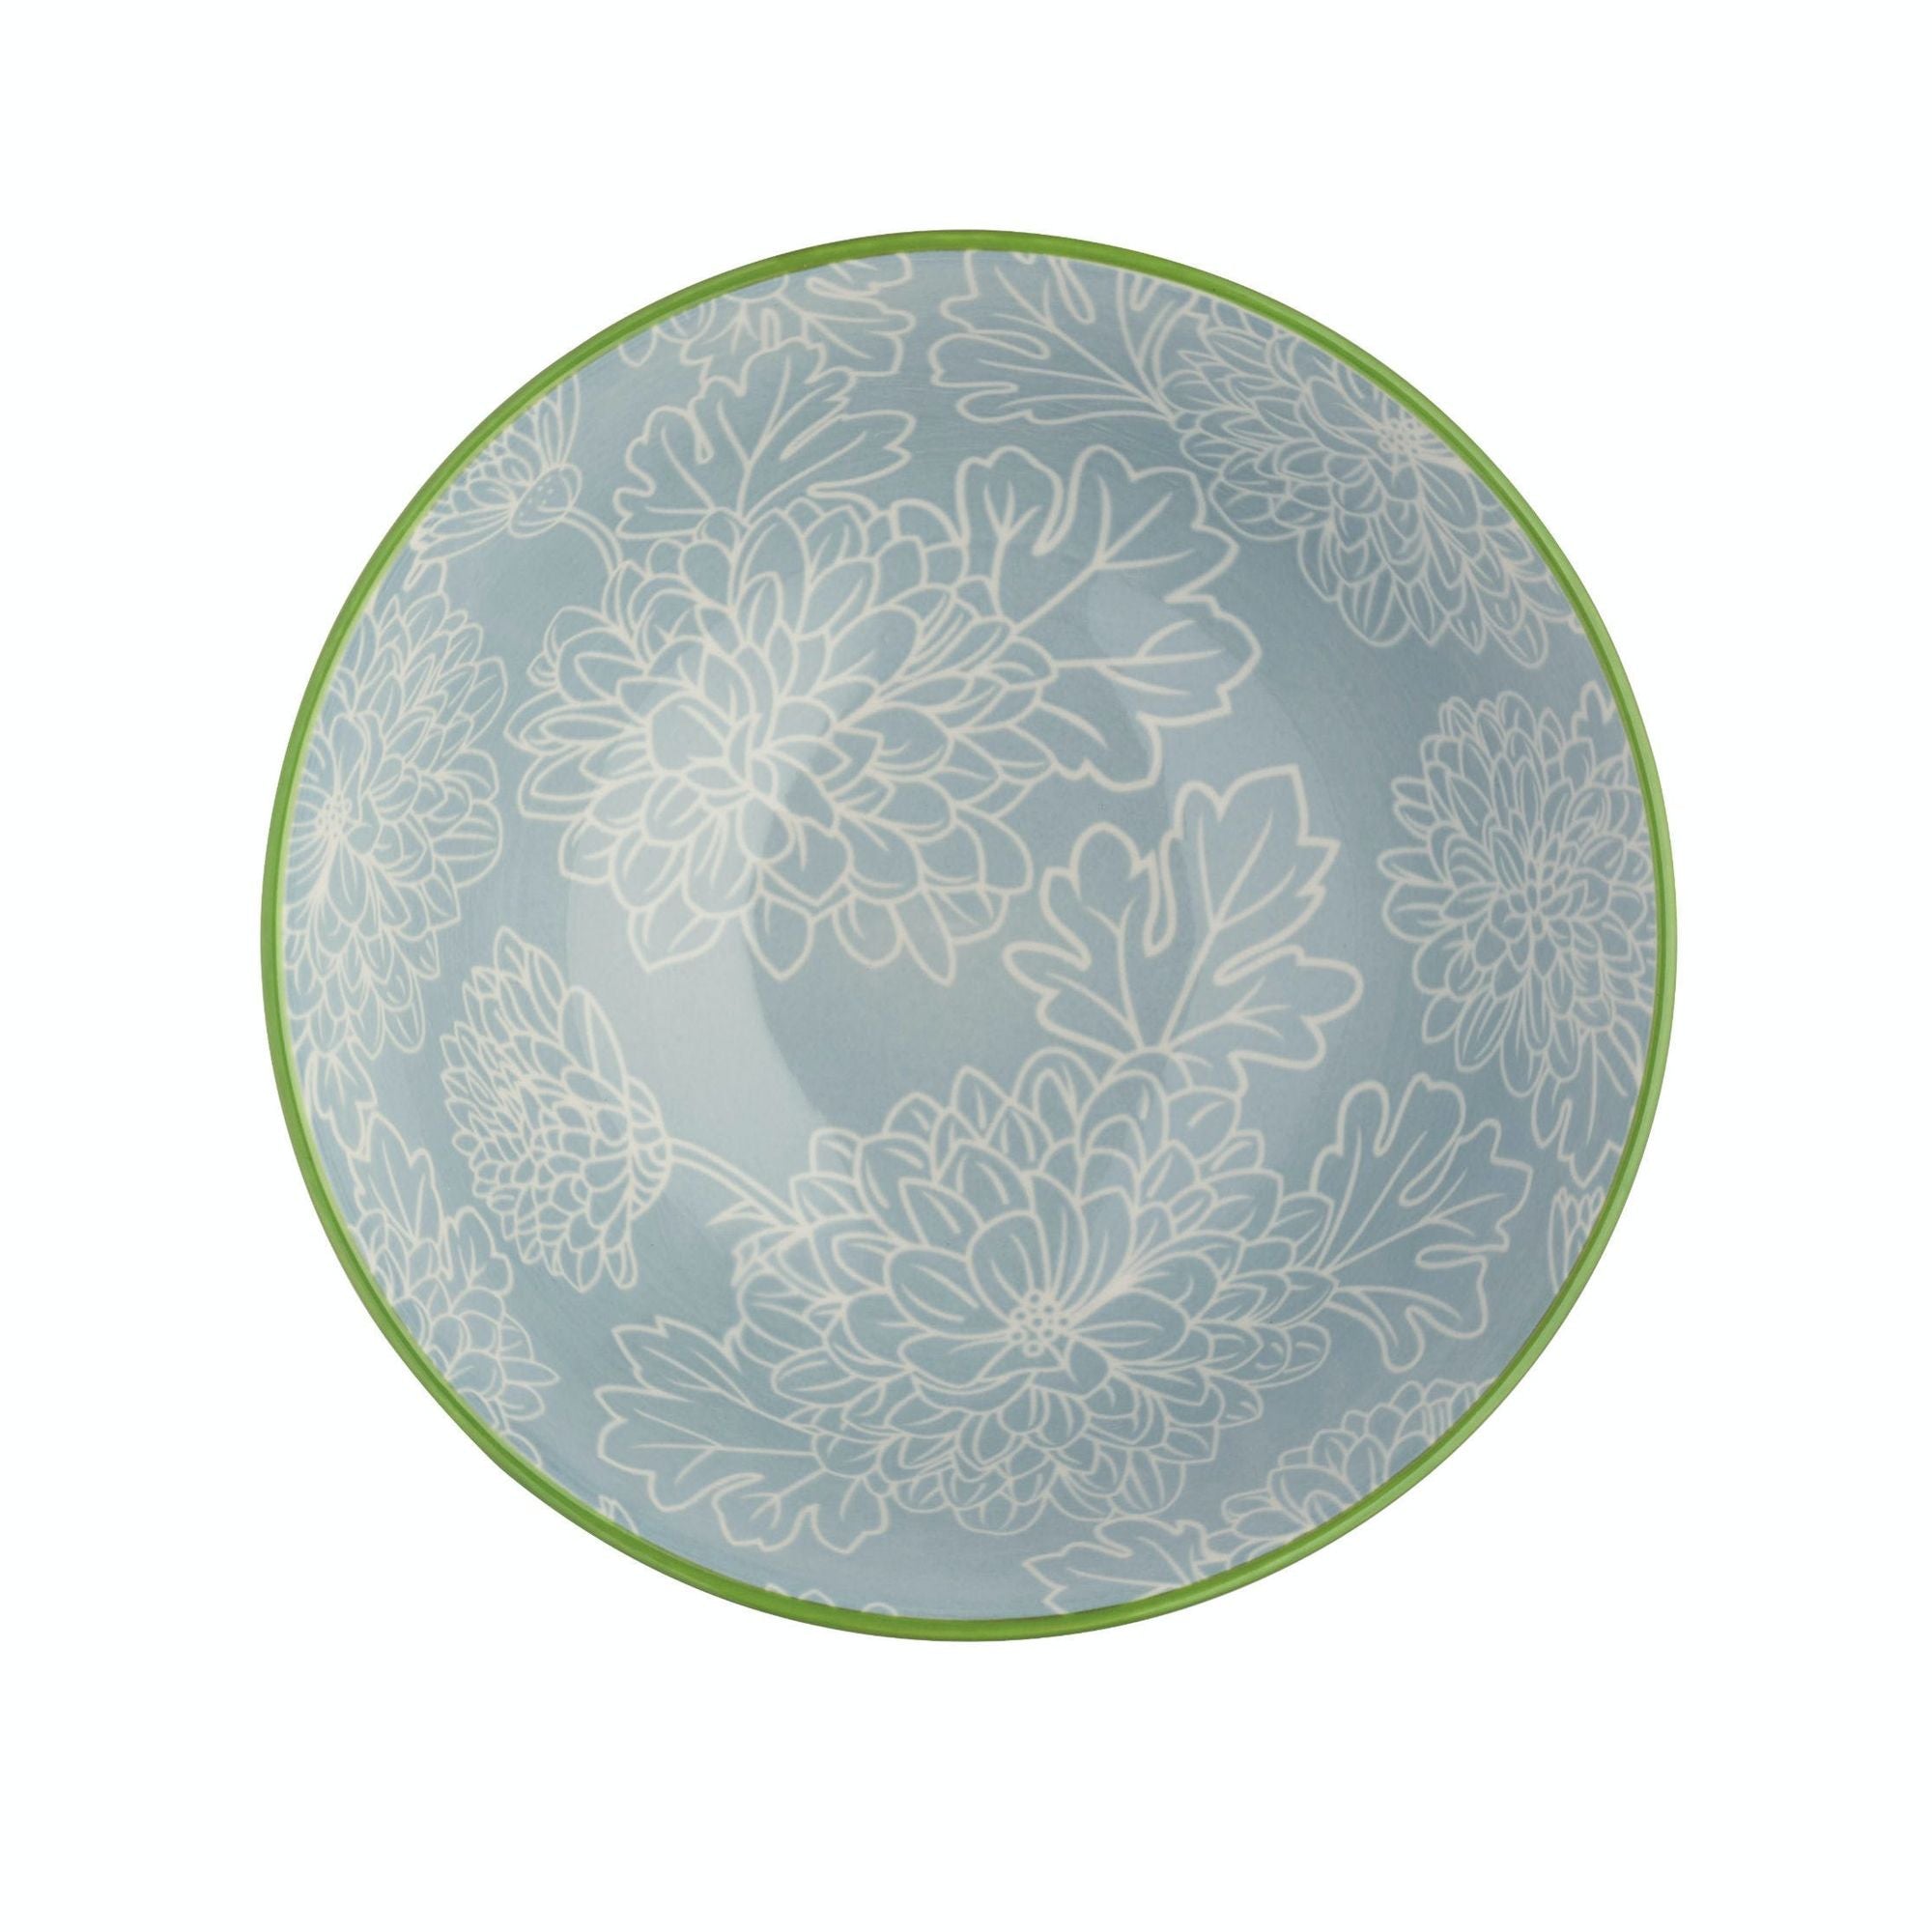 Mikasa Does It All Bowl 15.7cm - Grey Floral